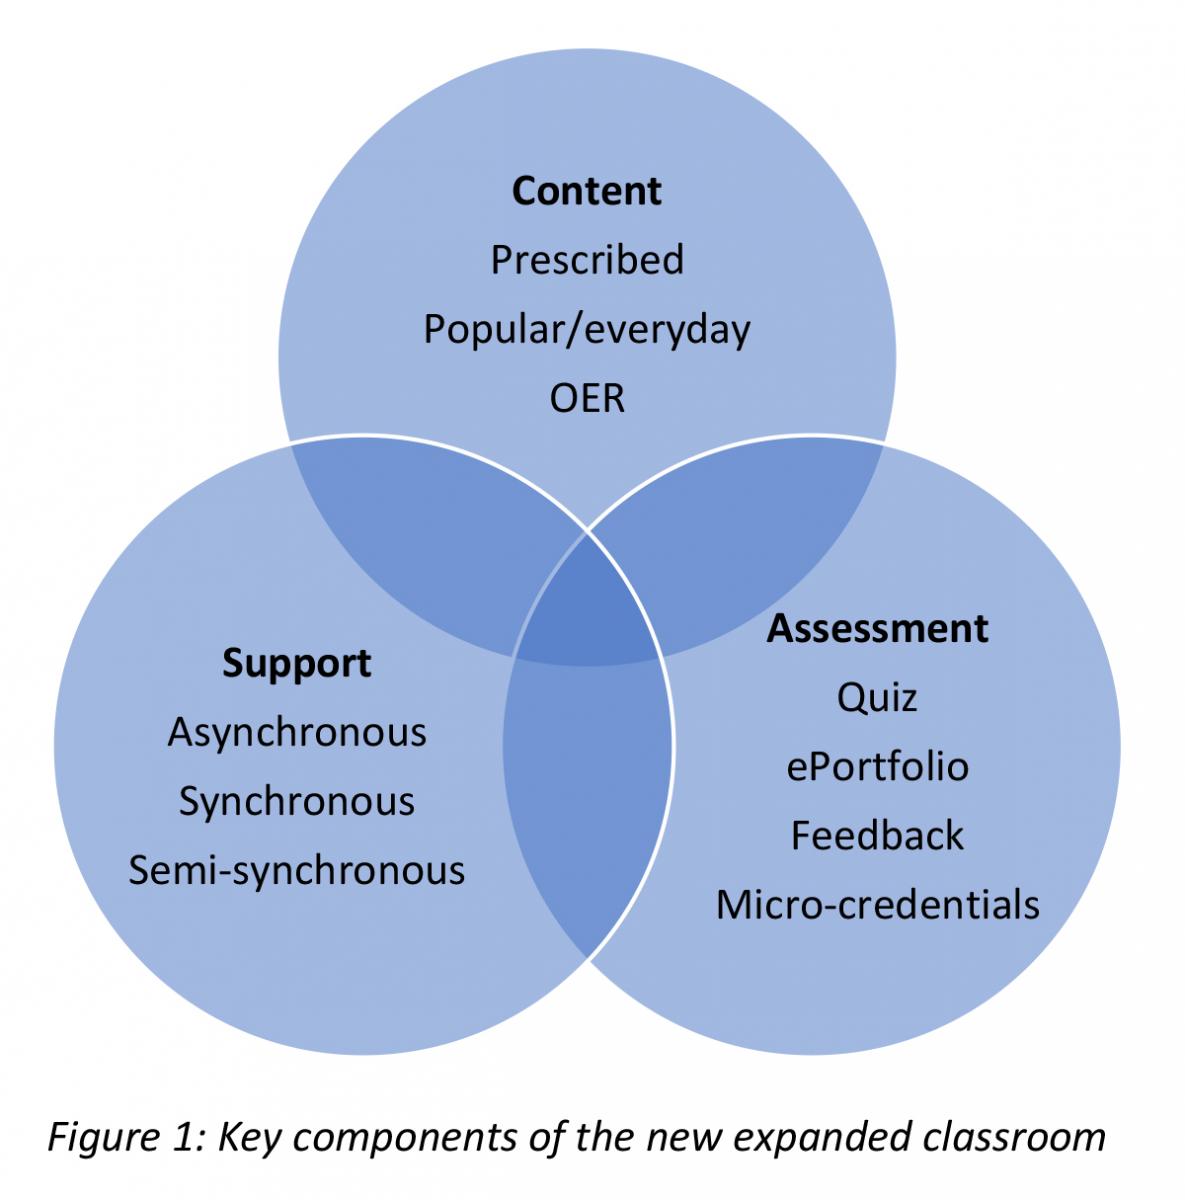 Figure 1: The 3 key components of the new expanded classroom